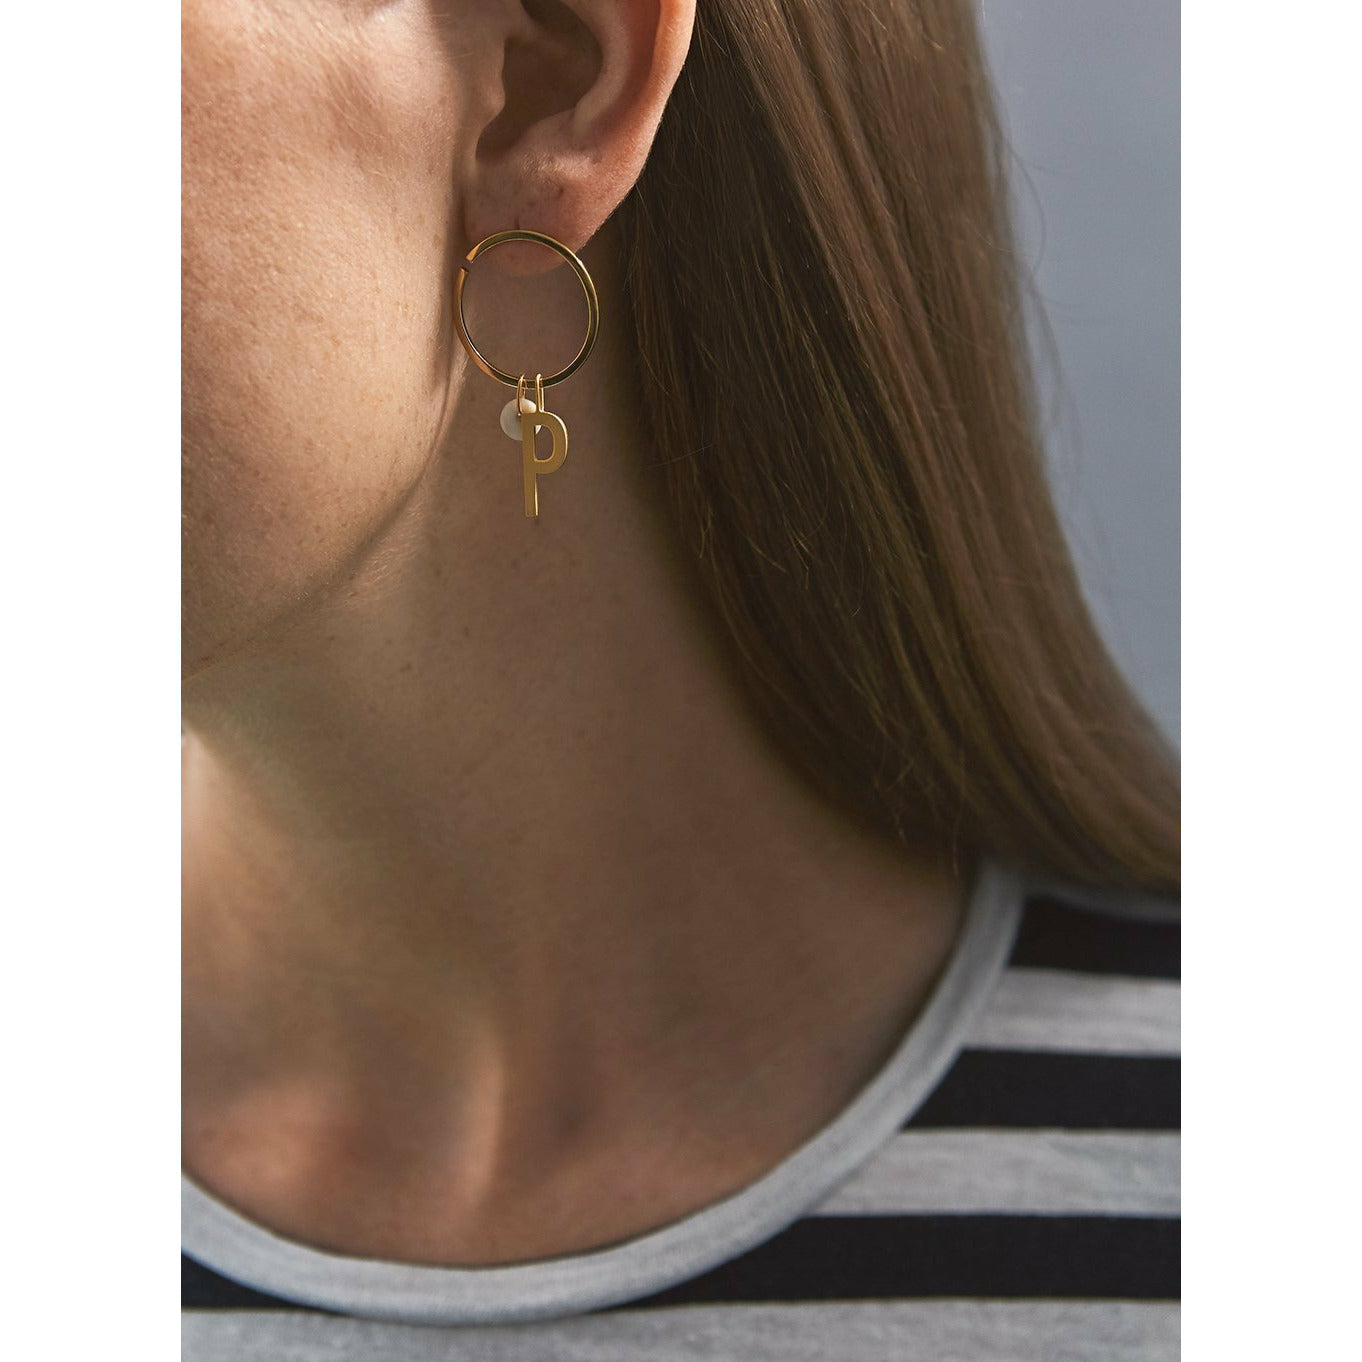 Design Letters Earring, Gold Plated